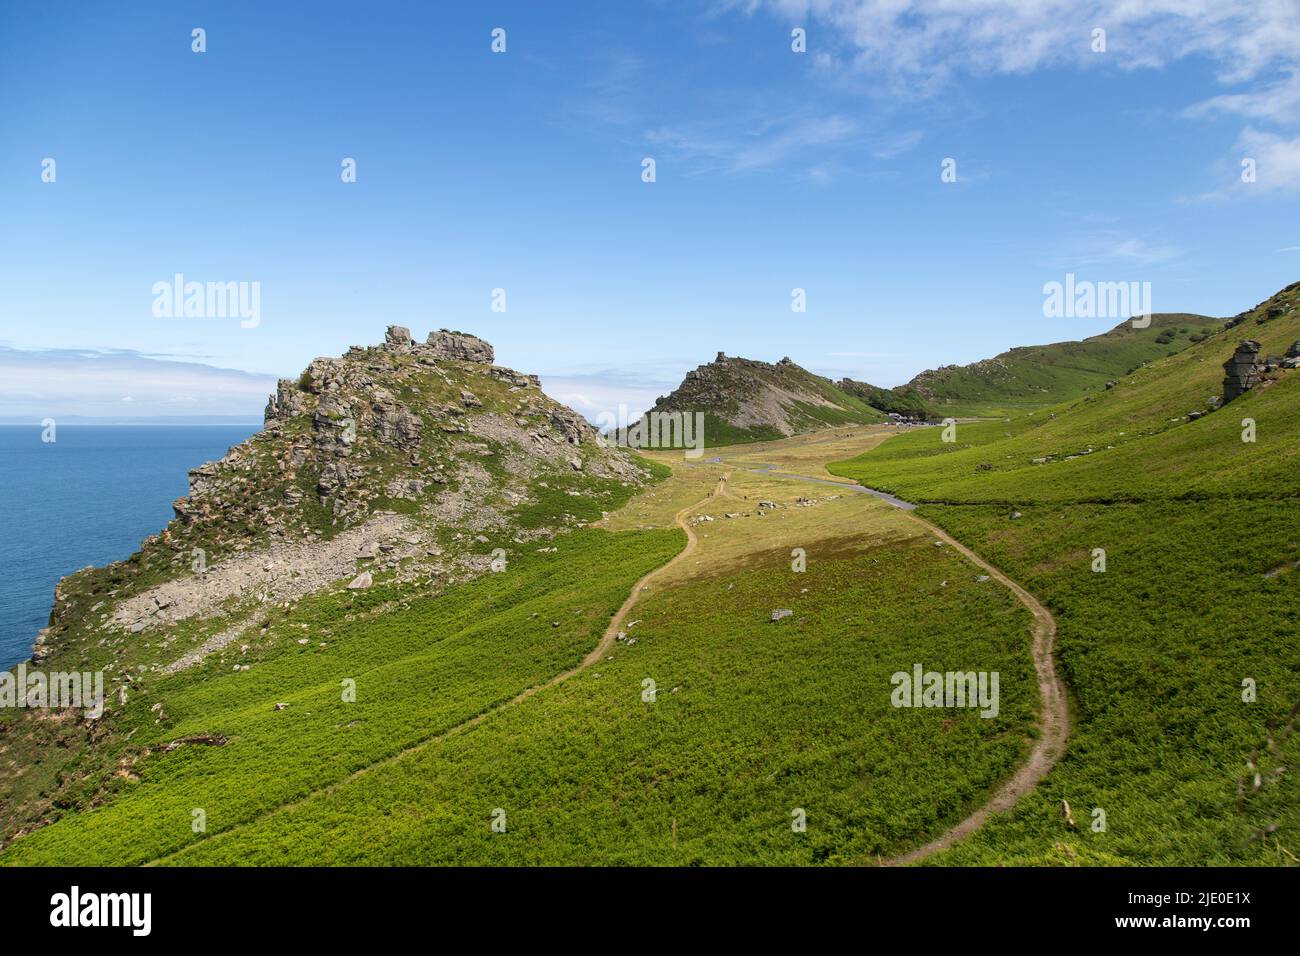 Valley of the Rocks, a popular tourist destination in the Exmoor National Park, Devon. Stock Photo